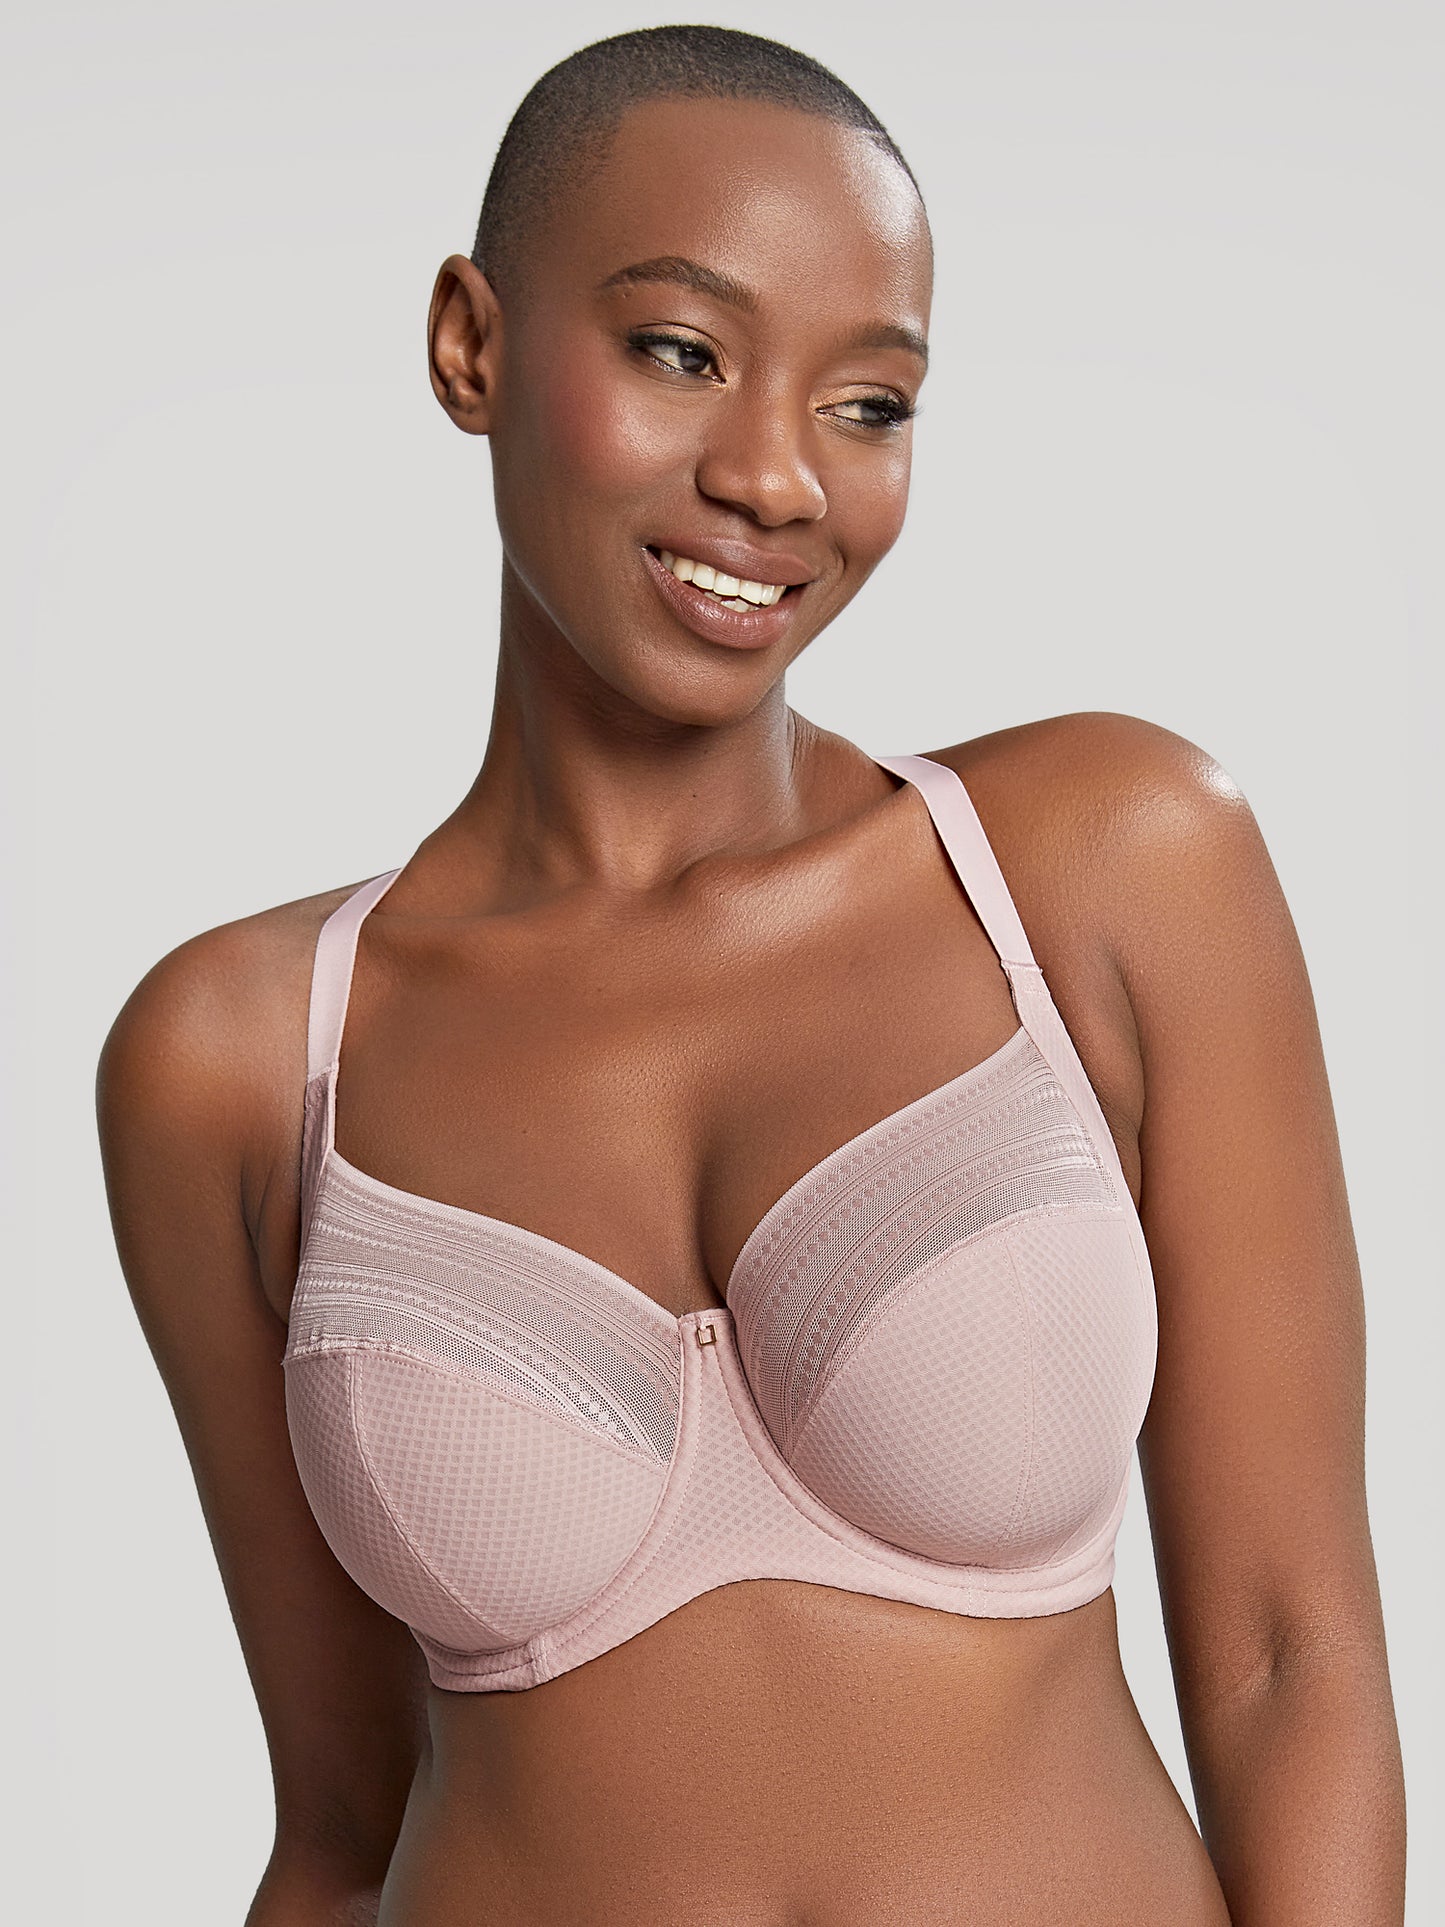 34E Bra Size in E Cup Sizes White by Panache Convertible and